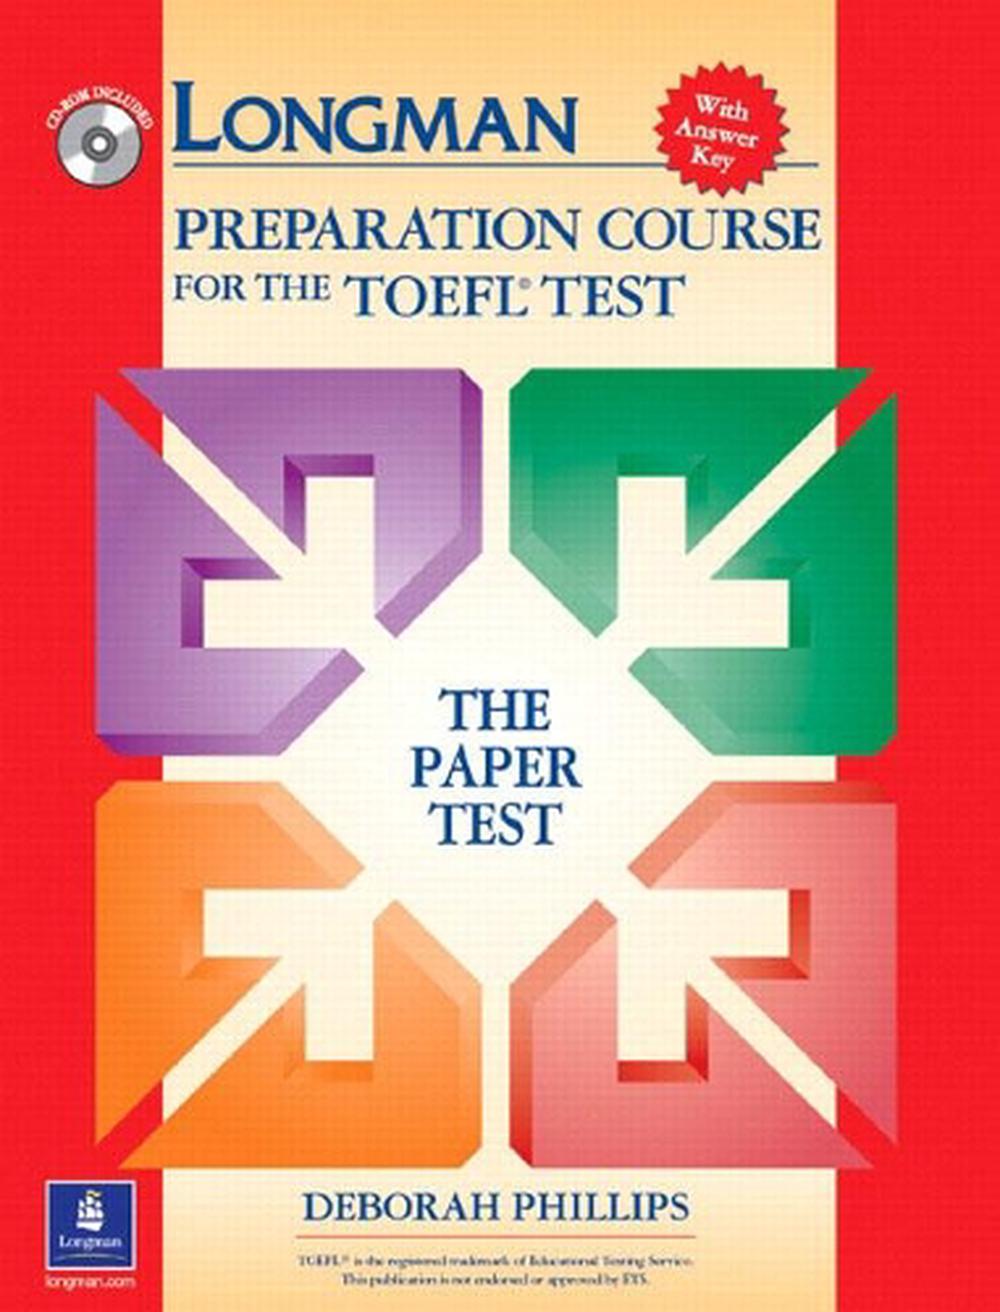 Longman Preparation Course for the TOEFL Test The Paper Test, with Answer Key b 9780131408838